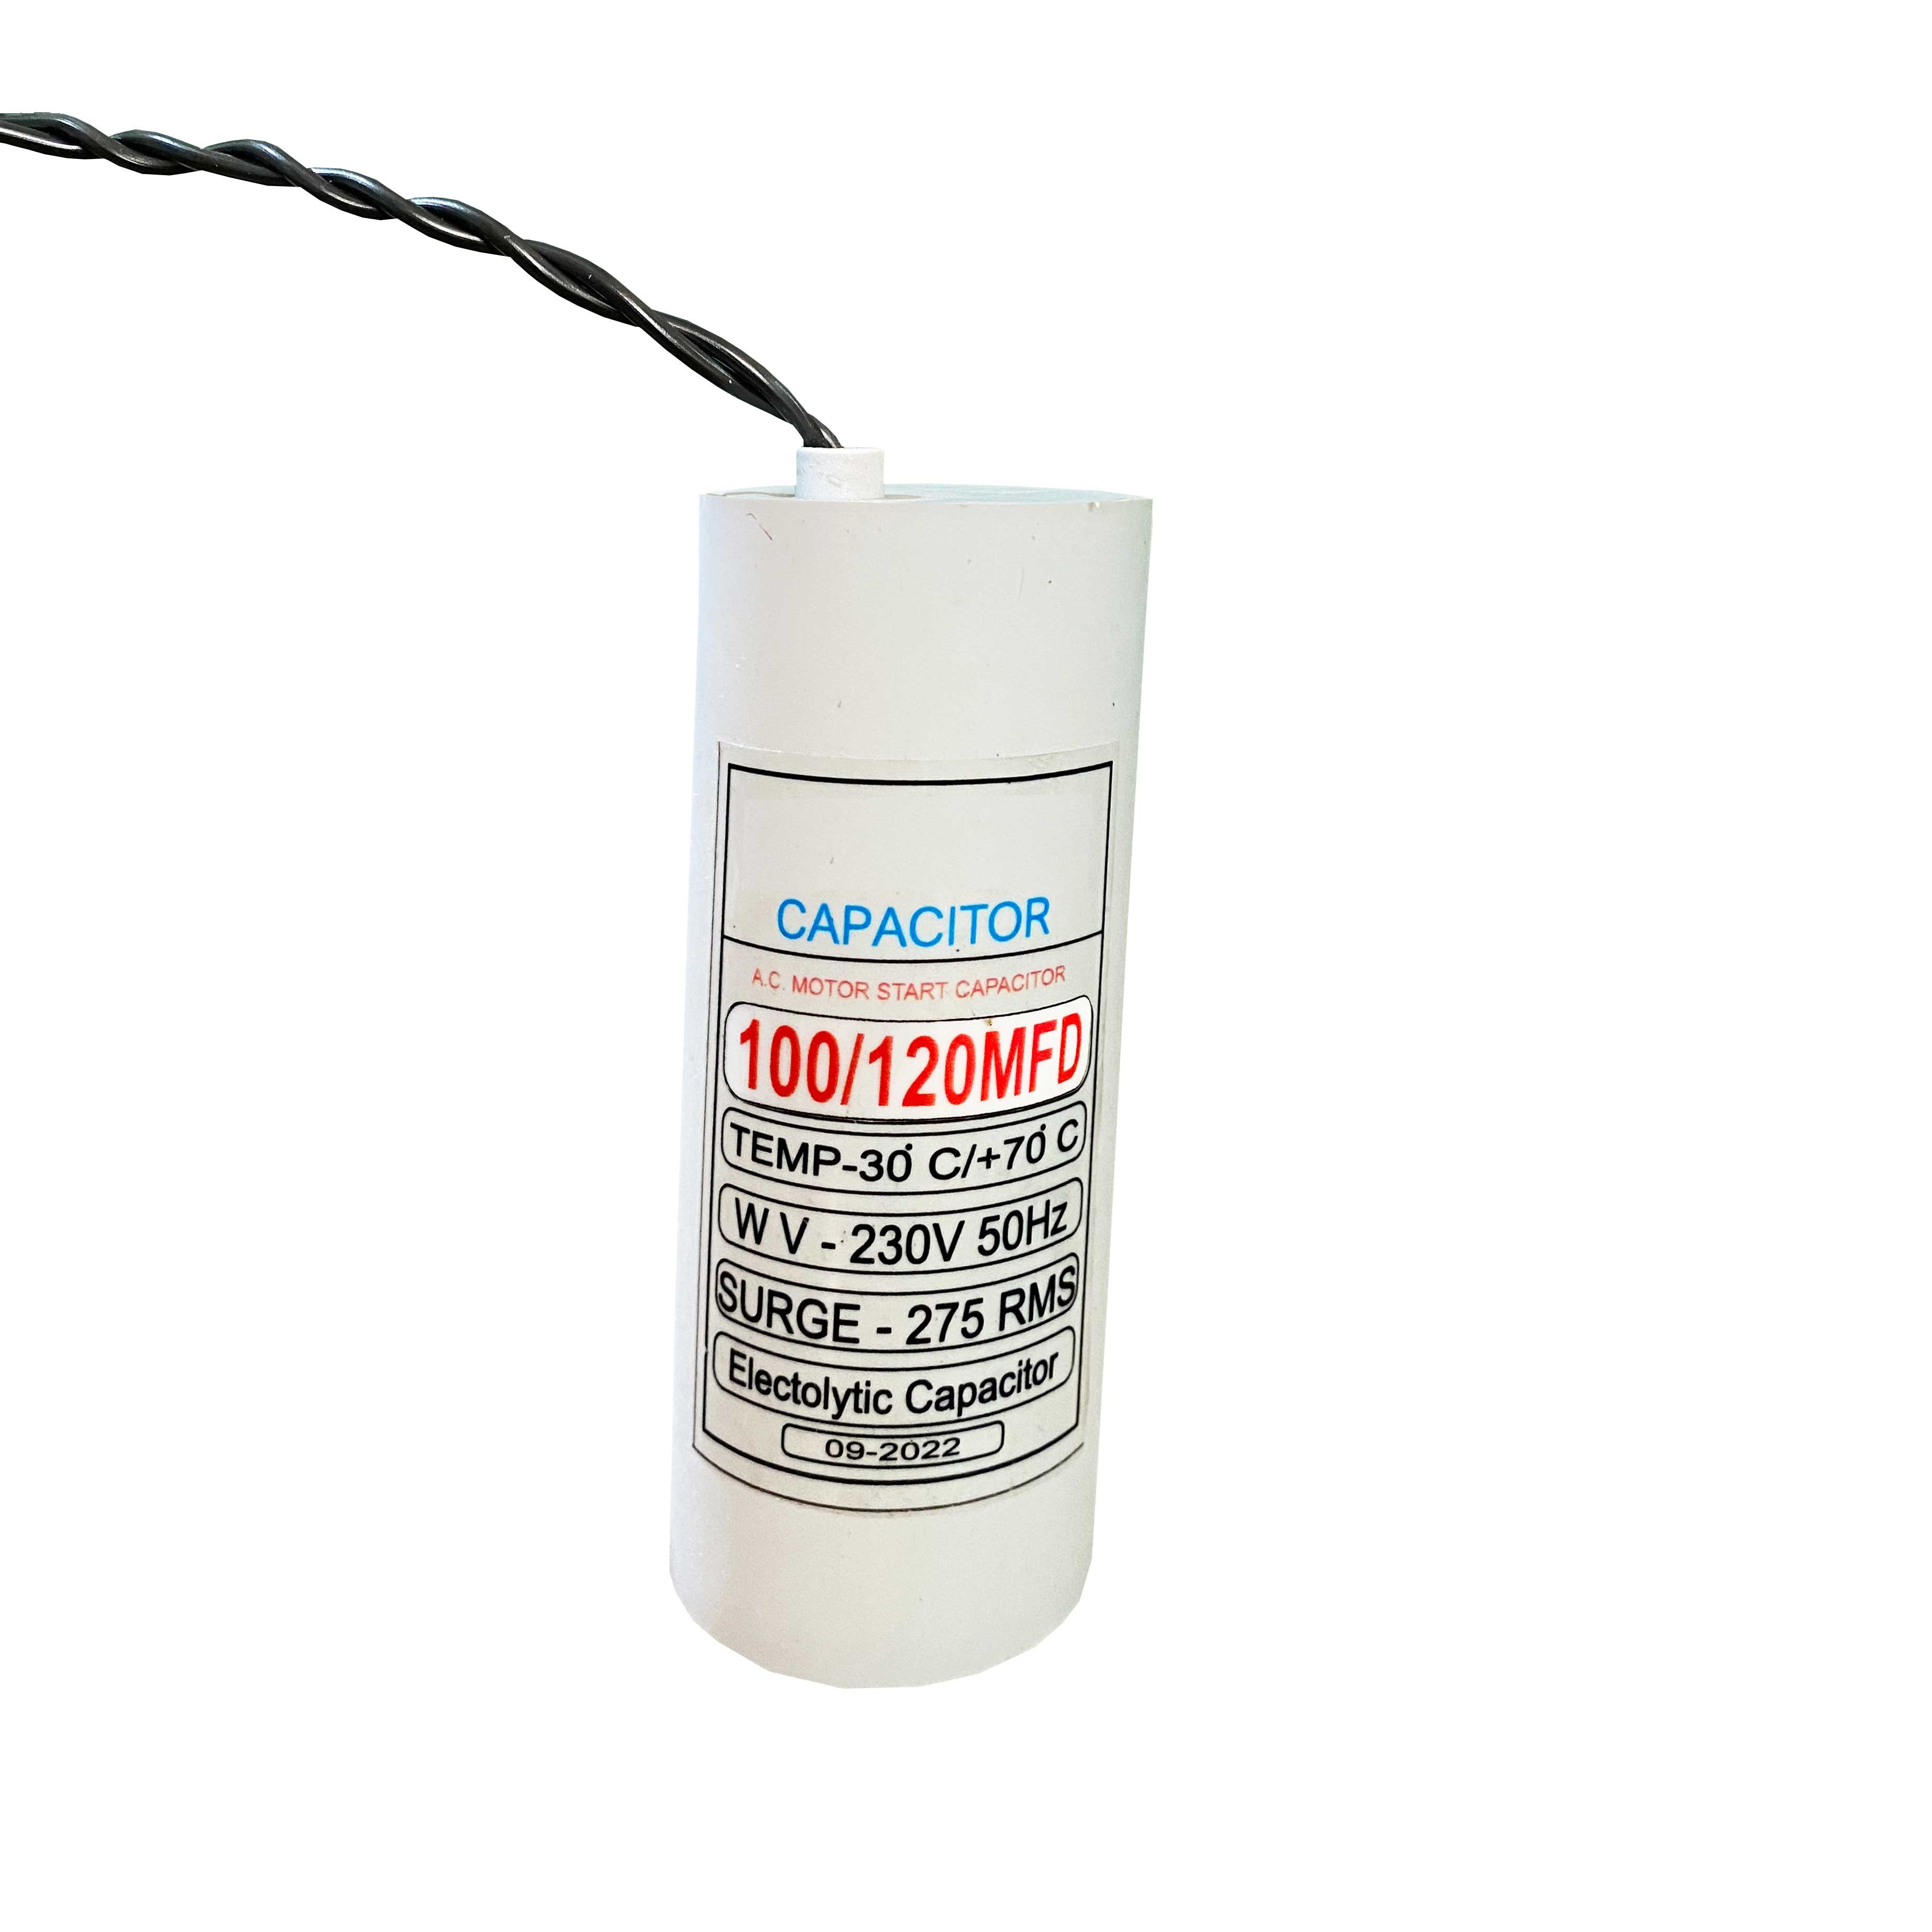 100 120 Start Capacitor suitable for any motor for starting torque